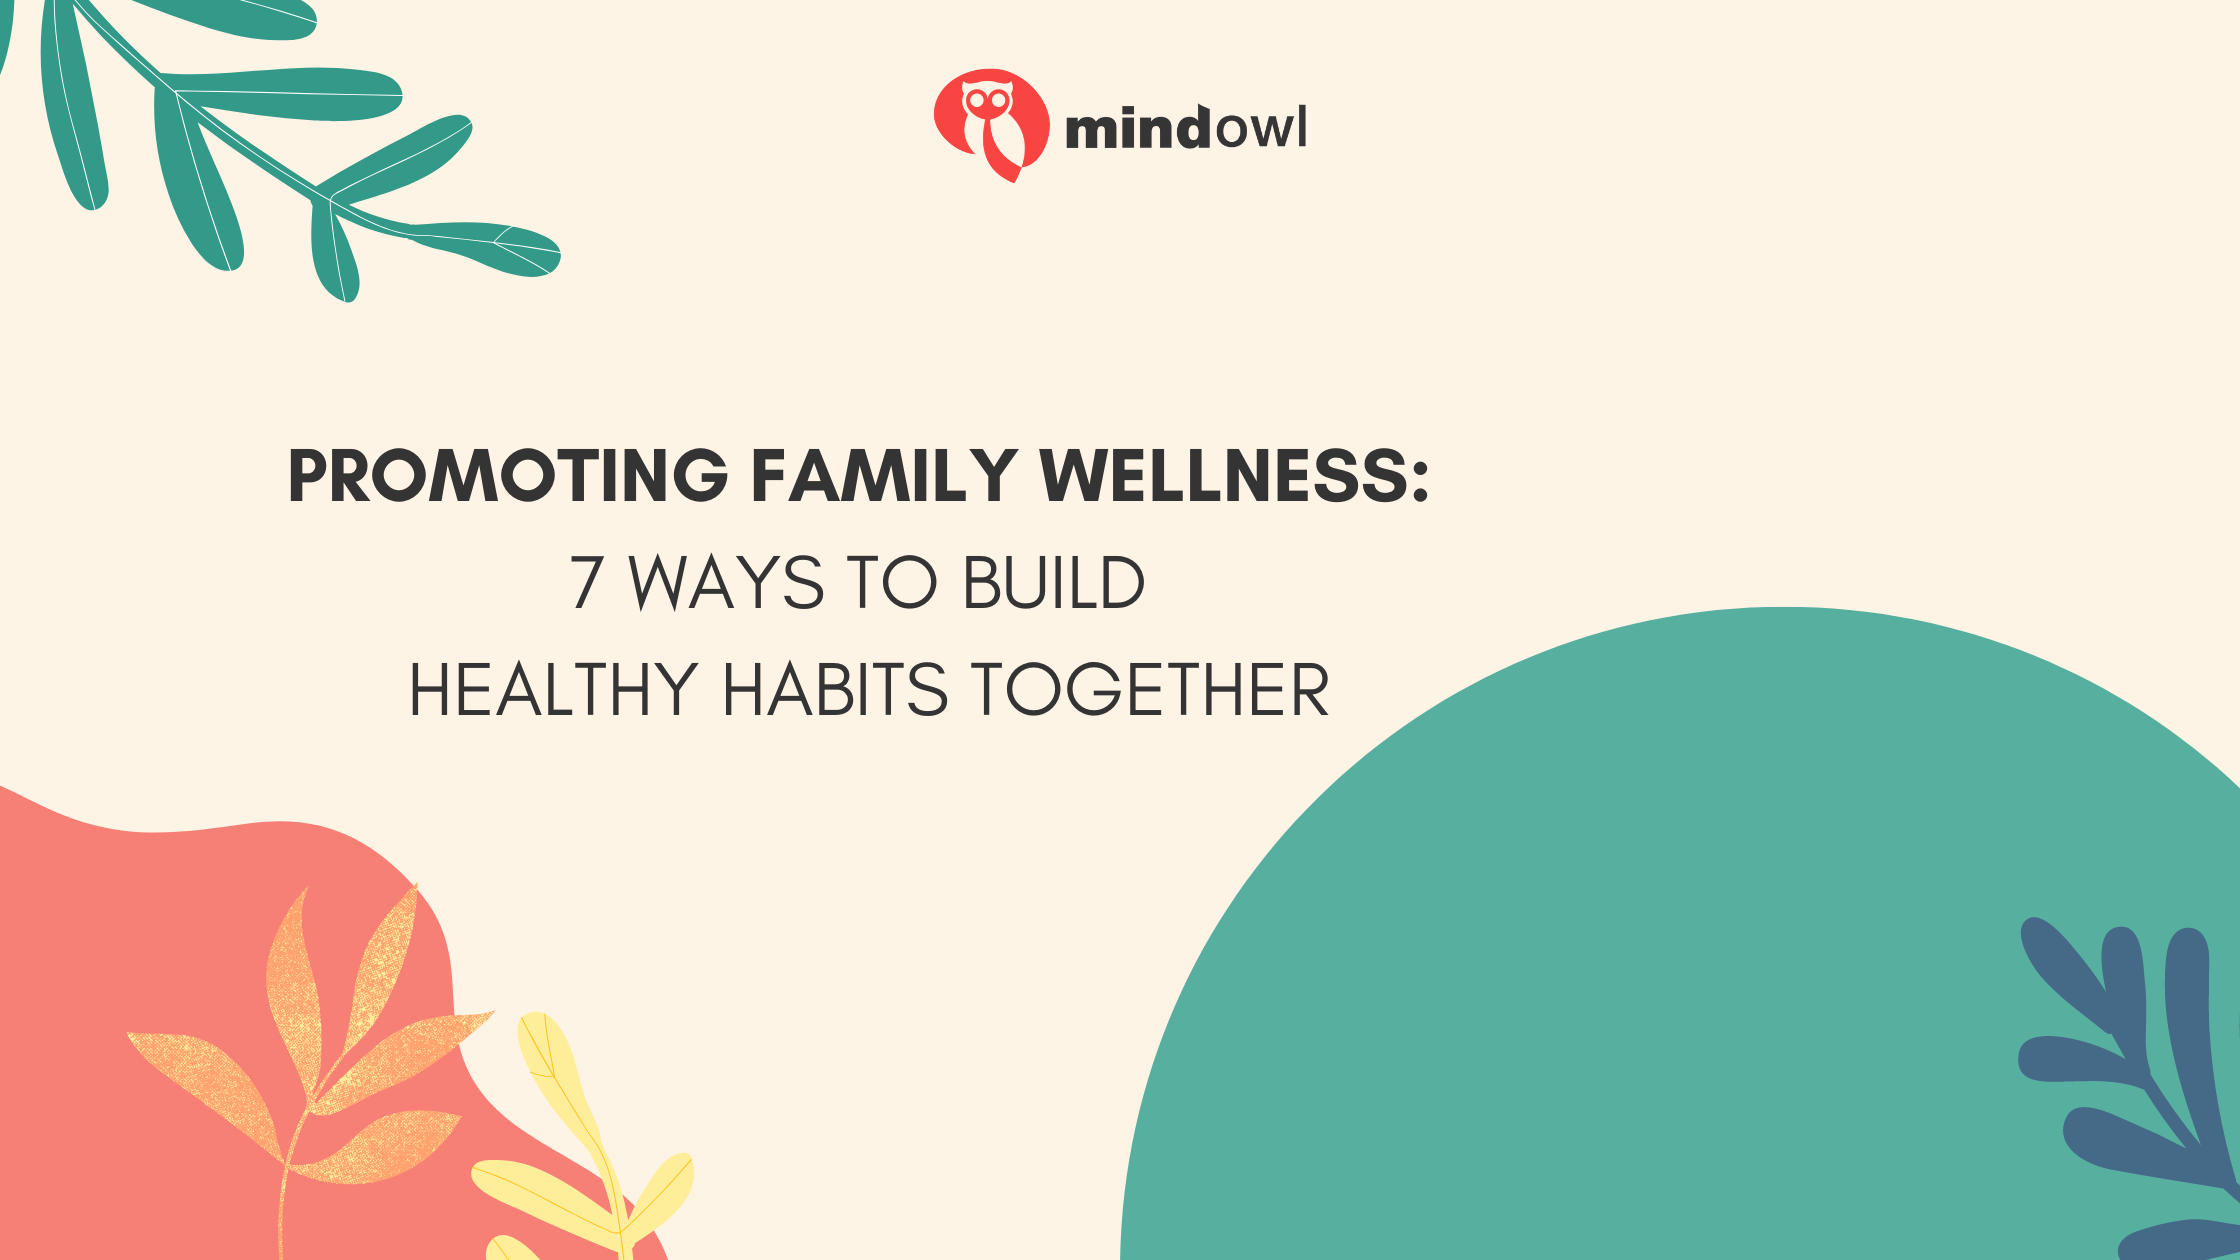 Promoting Family Wellness – 7 Ways to Build Healthy Habits Together